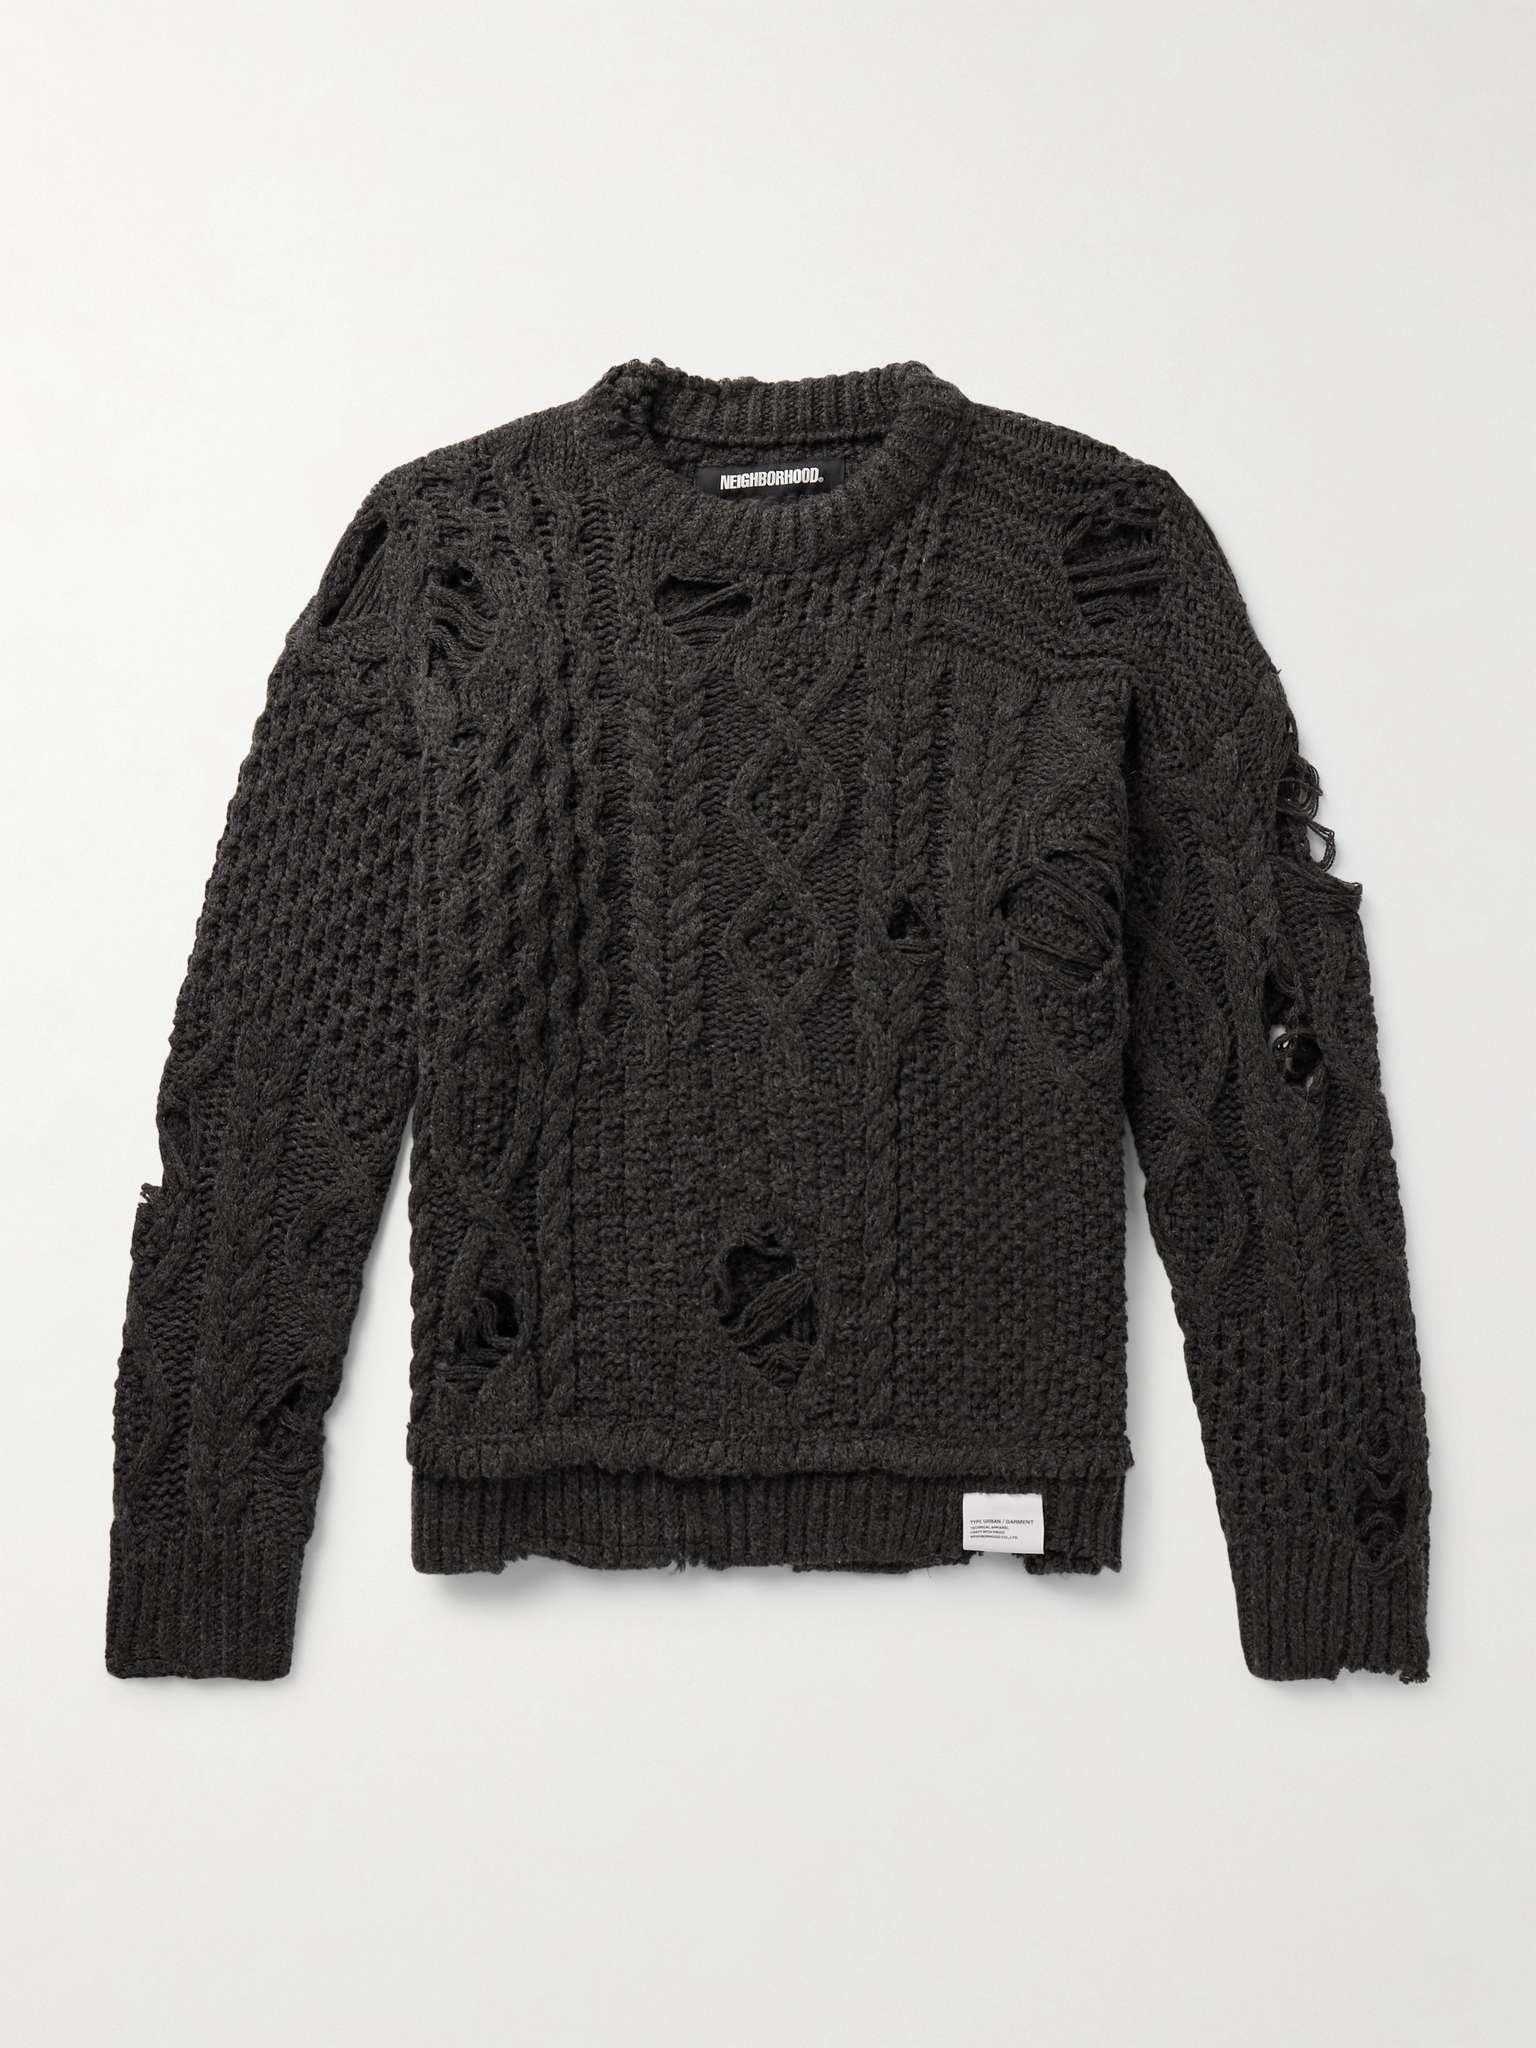 Savage Distressed Knitted Sweater - 1